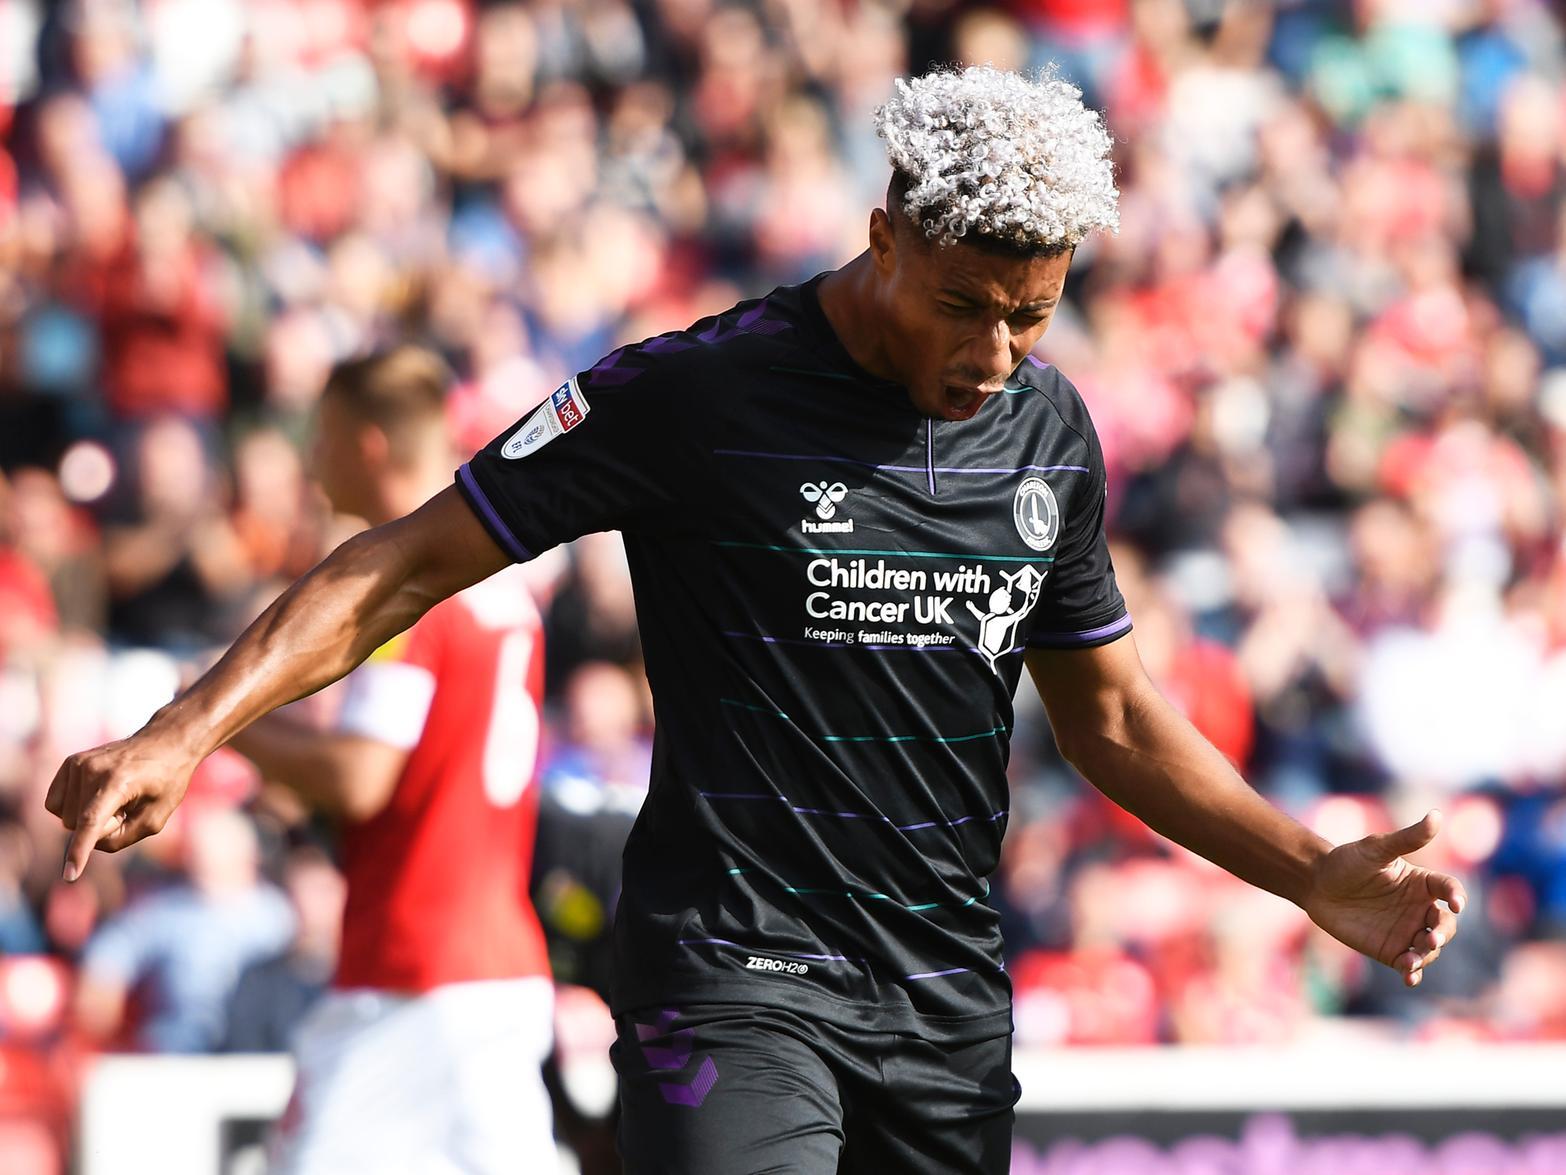 Charlton Athletic striker Lyle Taylor, who has been linked with a move to Sheffield Wednesday, is set for further contract talks with the Addicks, as Lee Bowyer looks to tie down the lethal forward. (South London Press)